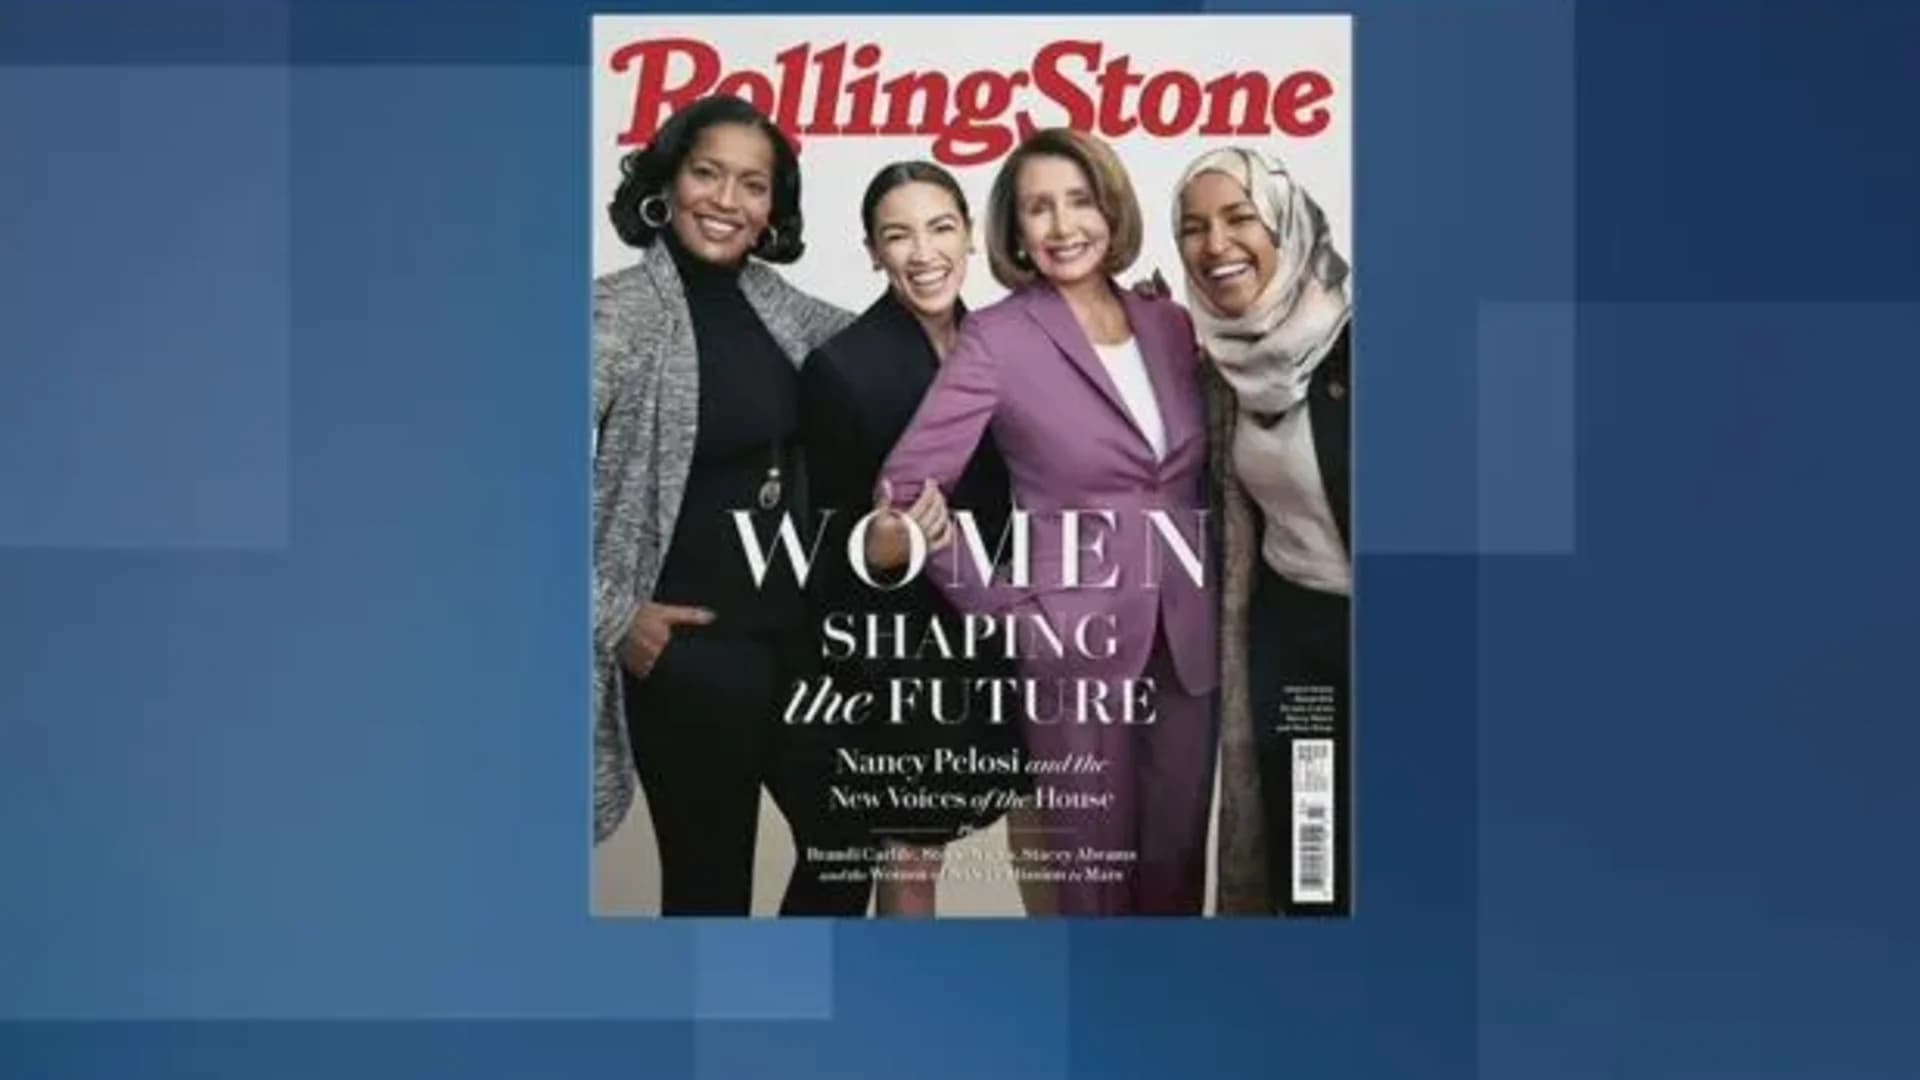 Congresswoman Jahana Hayes featured on cover of Rolling Stone